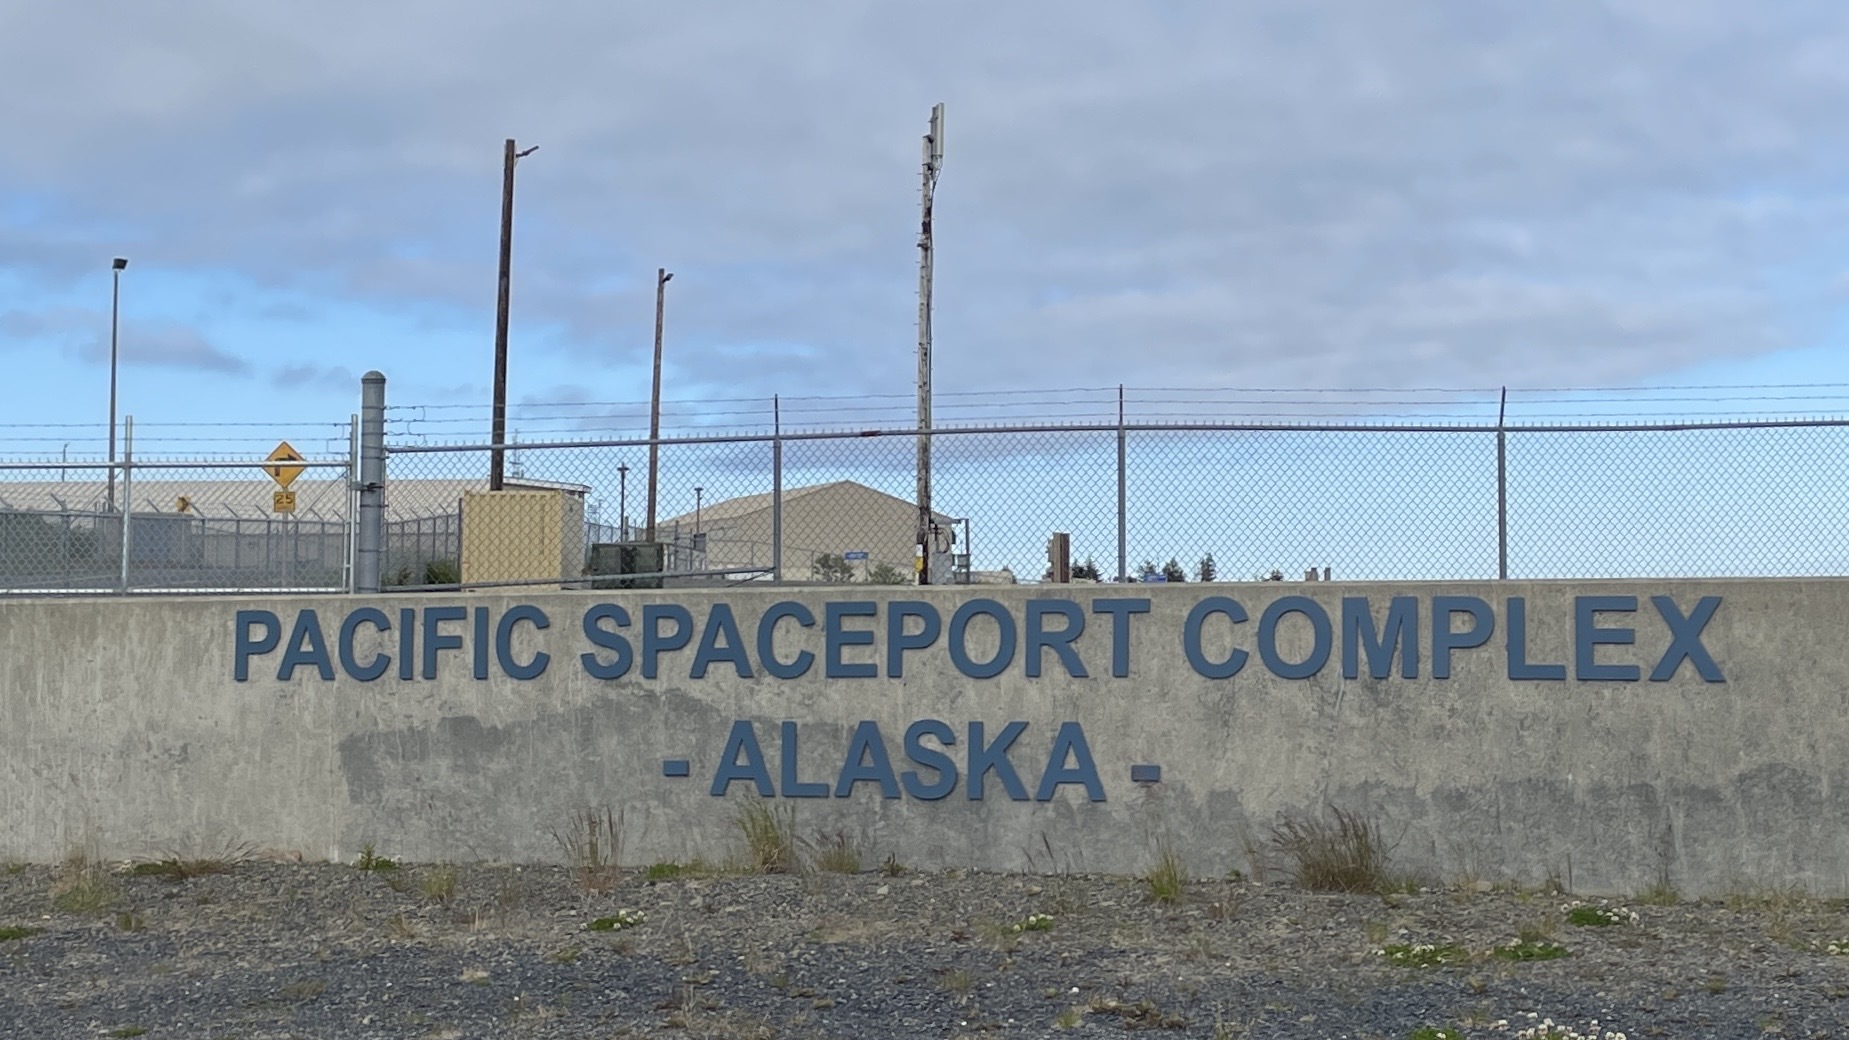 Pacific Spaceport Complex Alaska announces road closures ahead of the weekend